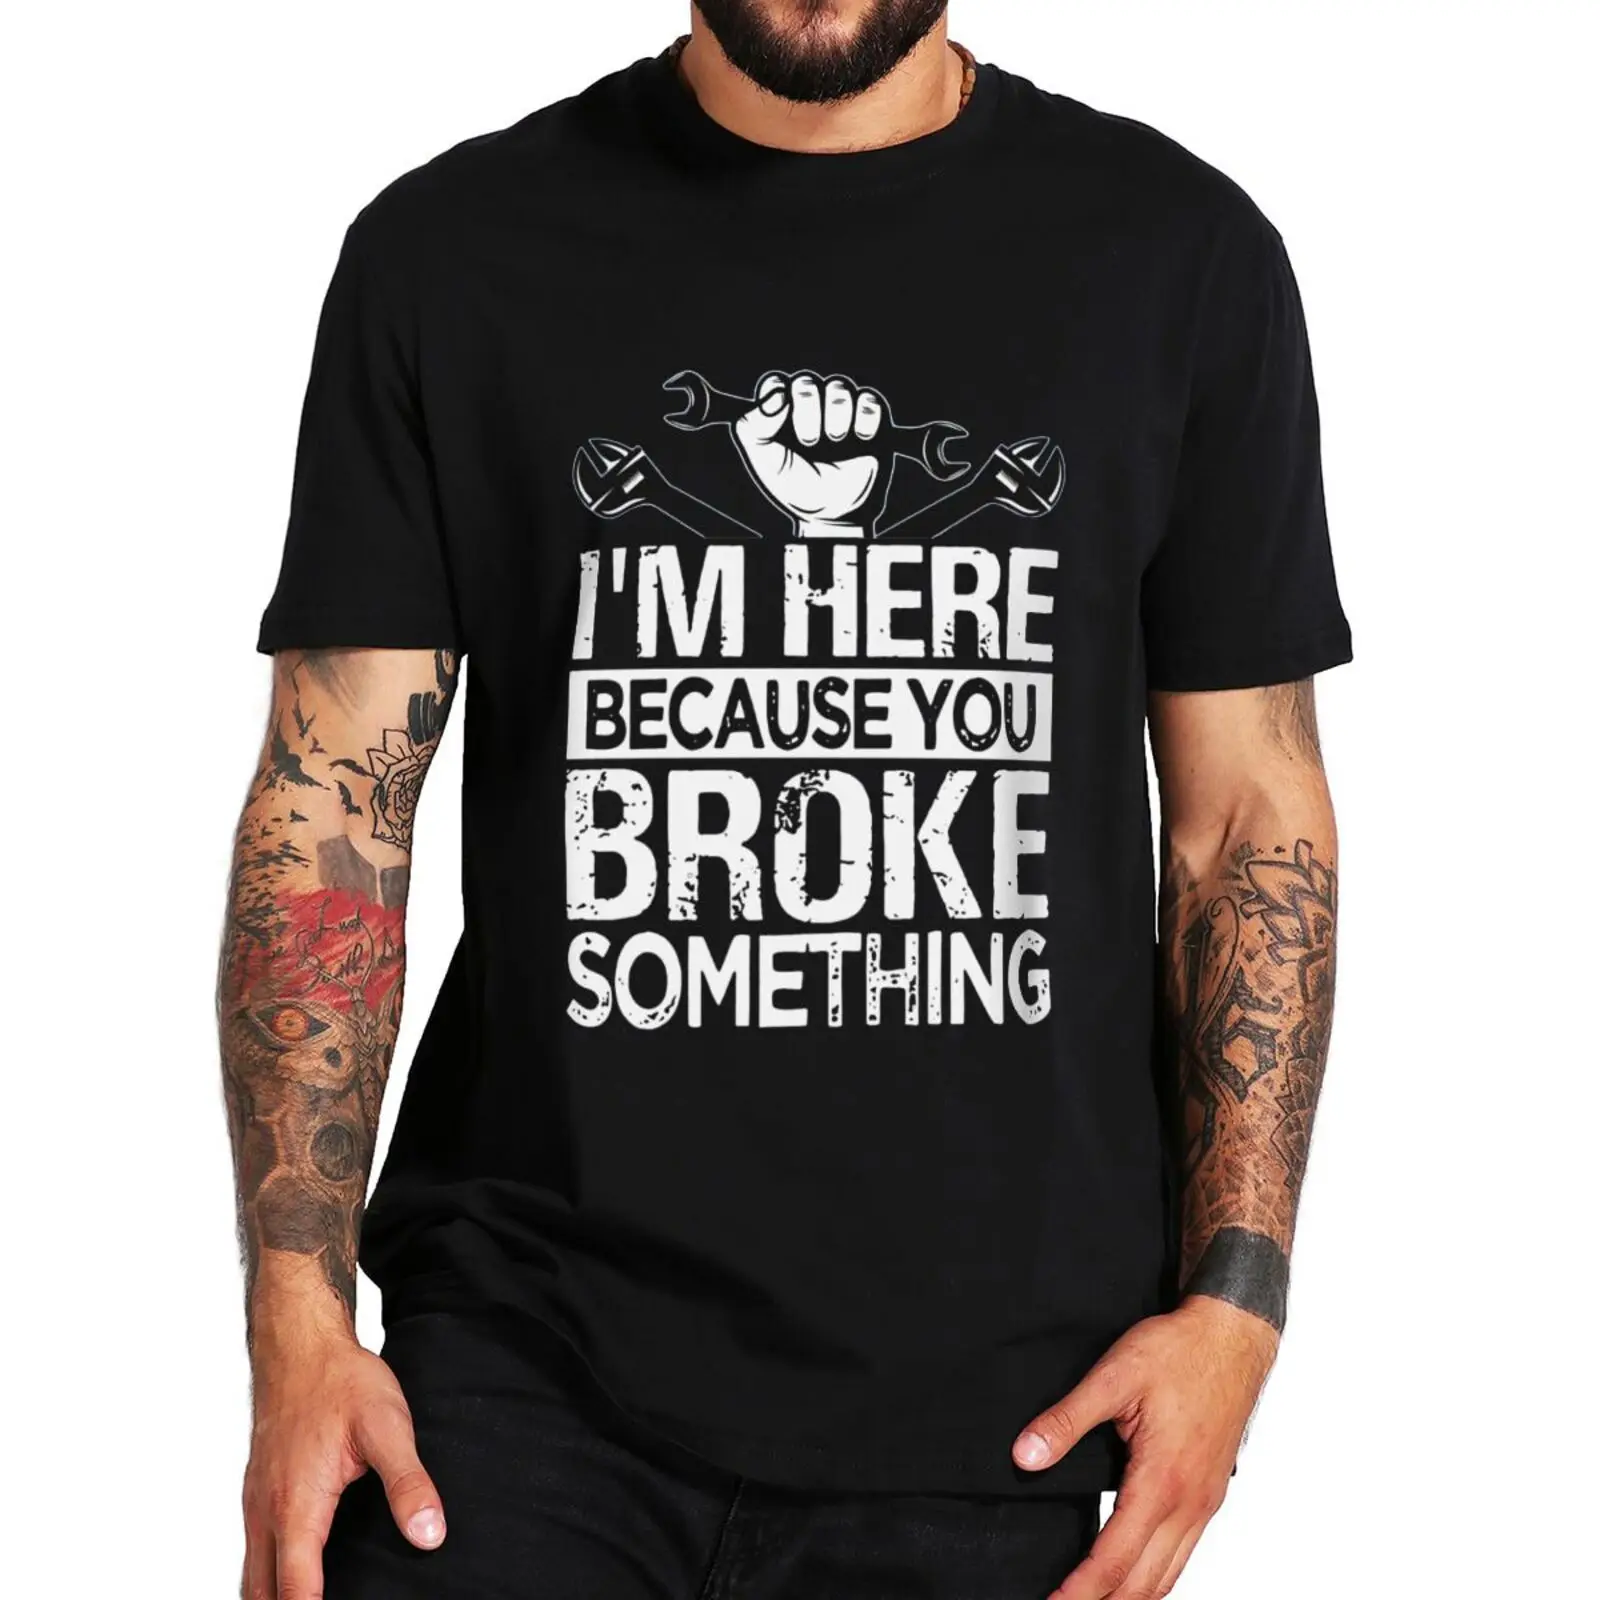 

I'm Here Because You Broke Something T Shirt Funny Car Worker Dad Boyfriend Gift Tee EU Size 100% Cotton Unisex Casual T-shirts